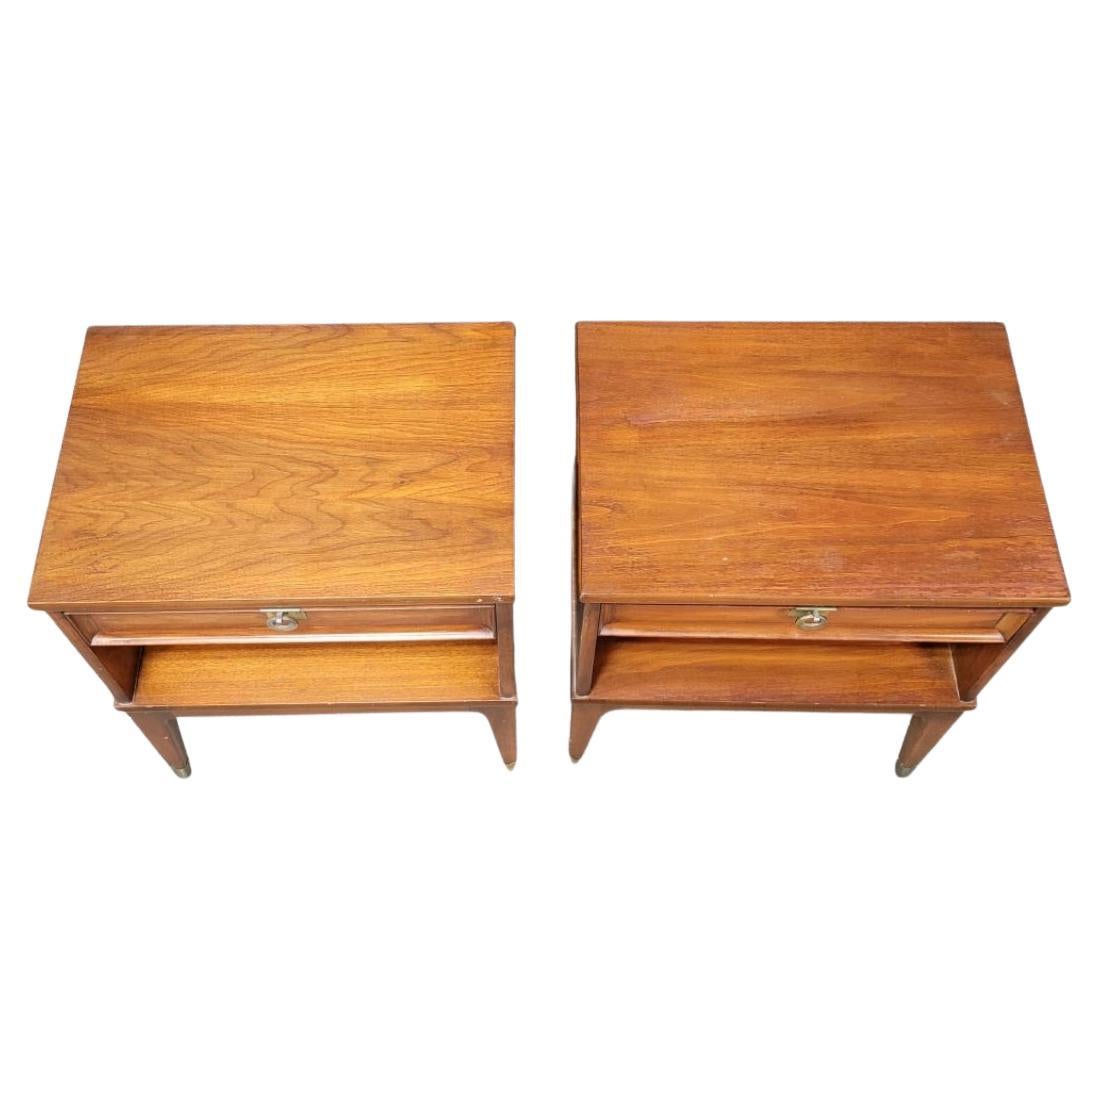 Pair of Mid-Century Modern single drawer Walnut nightstands ring brass handles. Very nice nightstands with 1 drawer each. Each drawer has a hanging brass ring pull. The nightstands are finished in a medium walnut color that sits on a 4 legged wooden